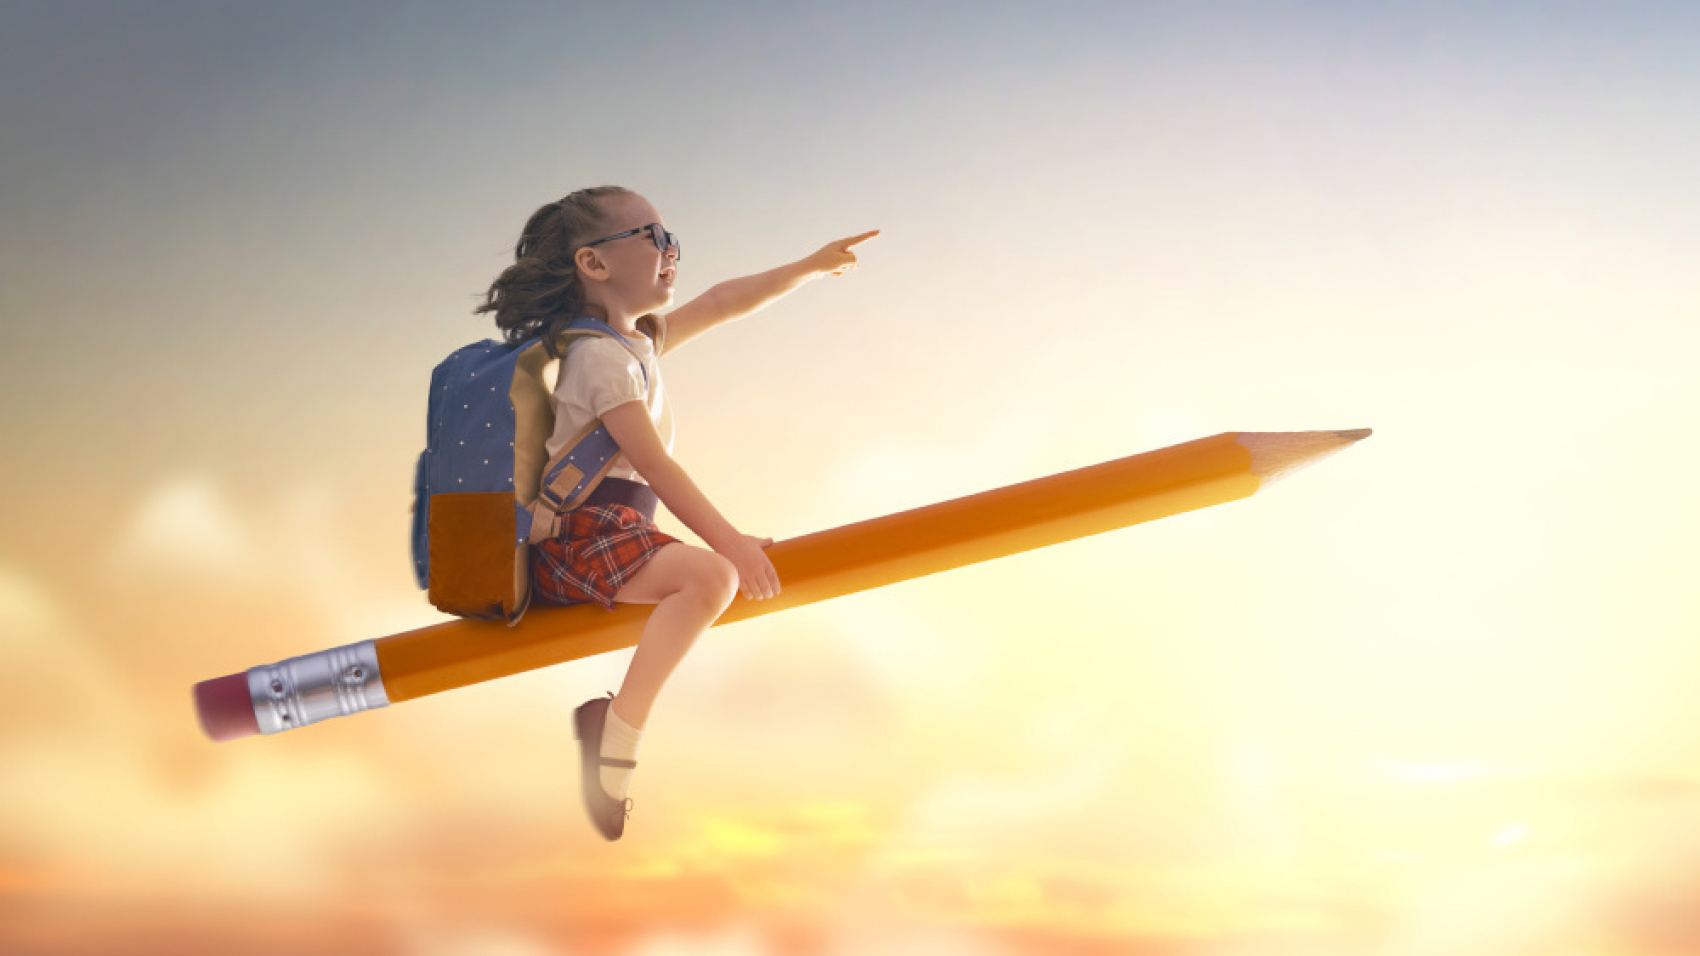 Back to school! Happy cute industrious child flying on the pencil on background of sunset sky. Concept of education and reading. The development of the imagination.